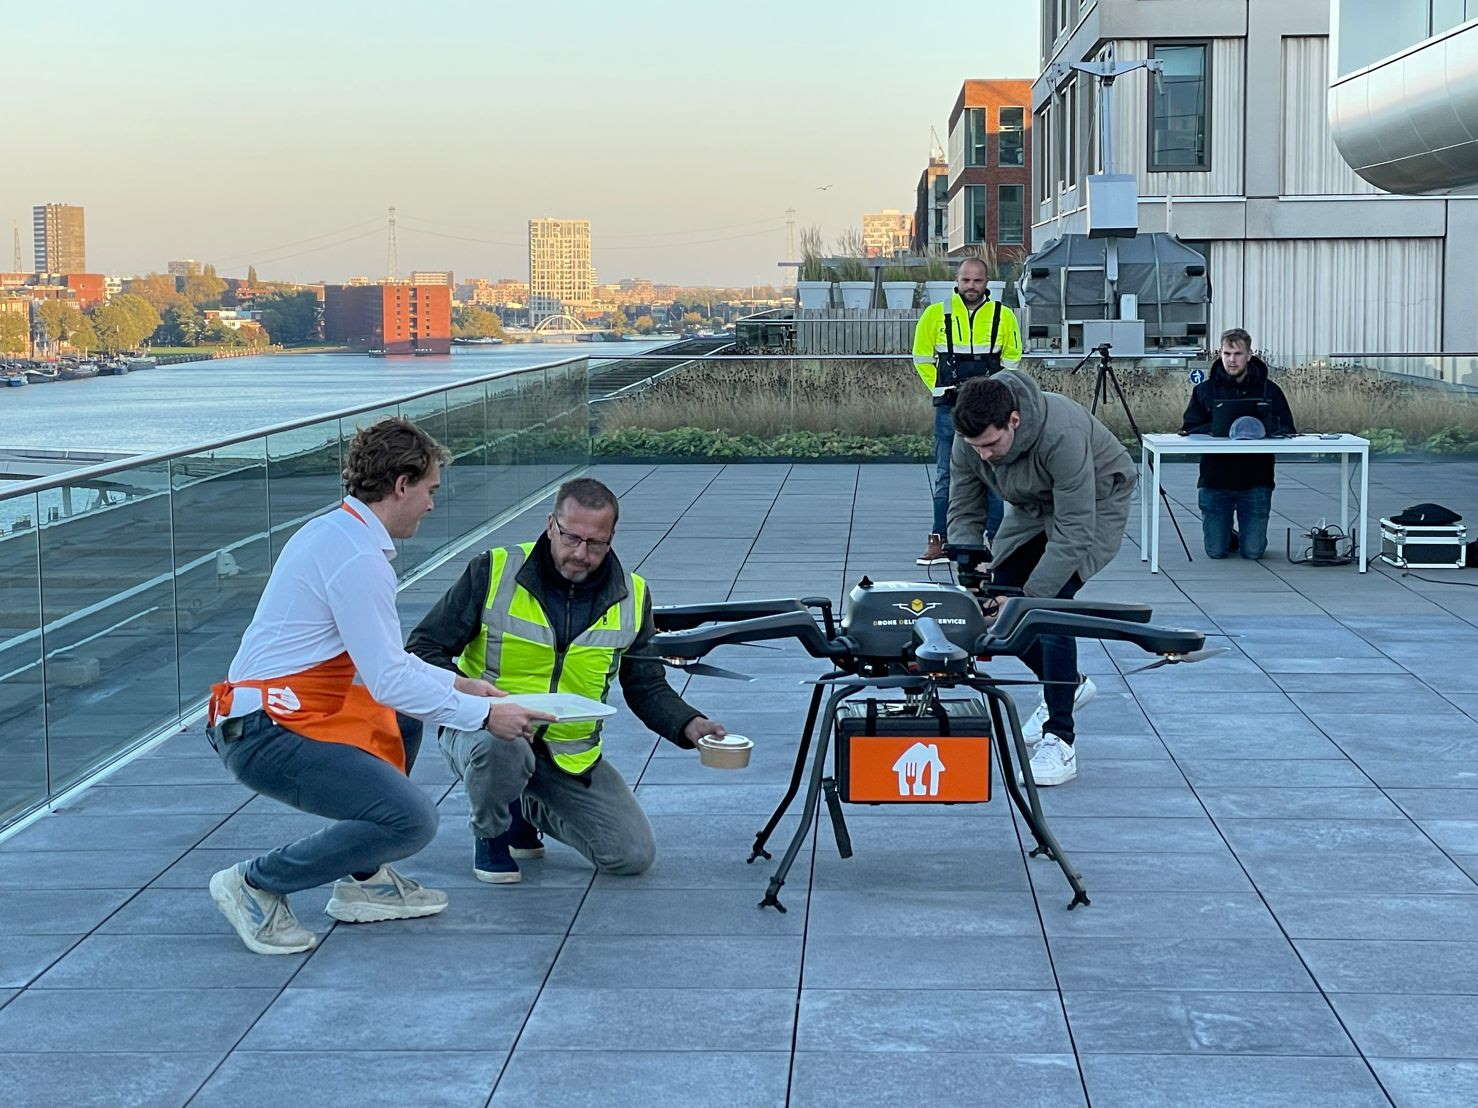 Drone flies meal in Amsterdam city center – sUAS News – The Business of Drones